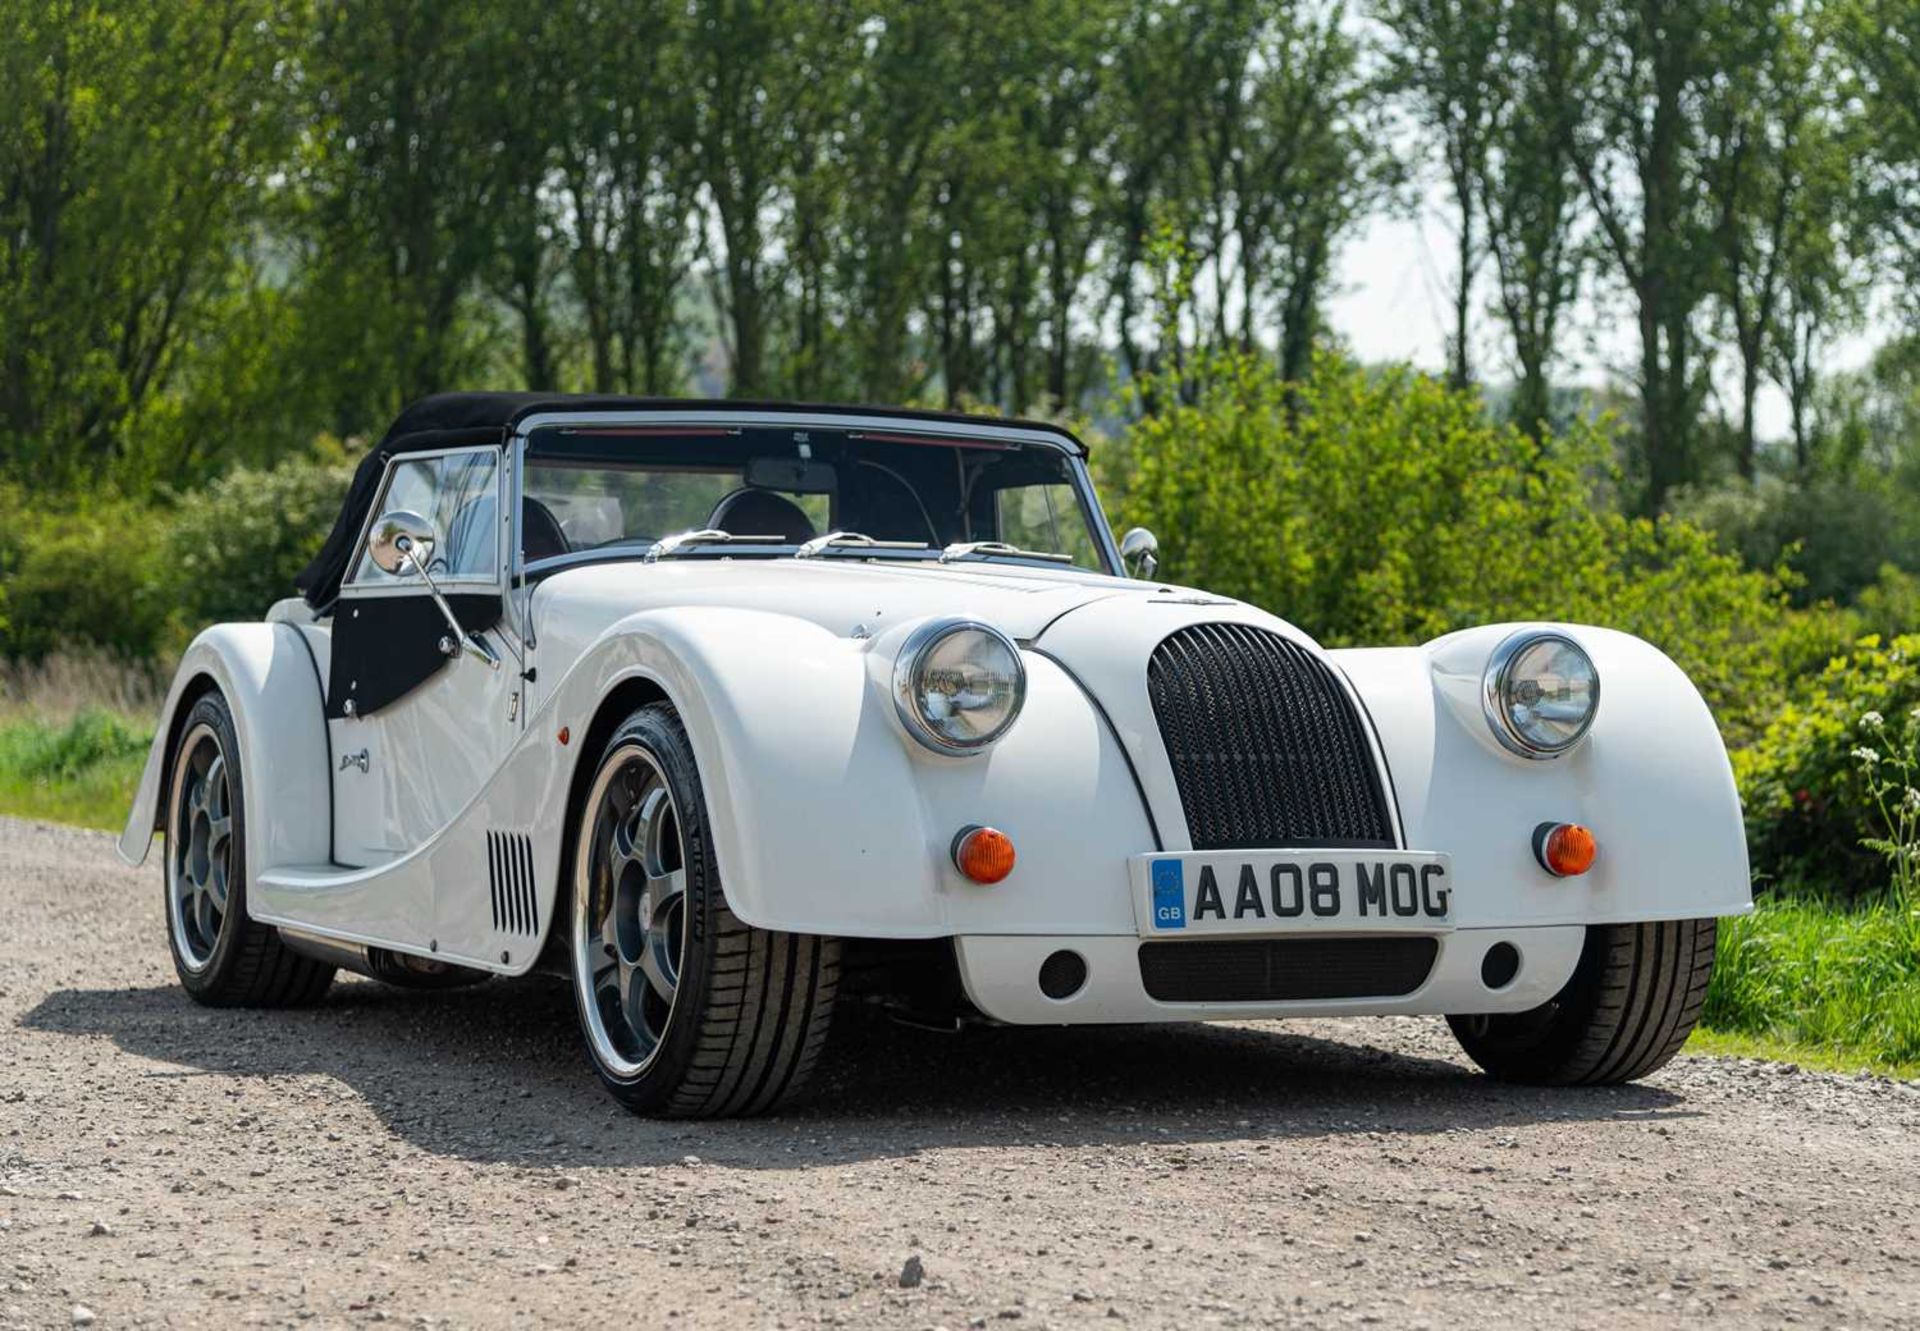 2012 Morgan Plus 8 ***NO RESERVE*** Believed to be one of just 60 produced and with MOT records supp